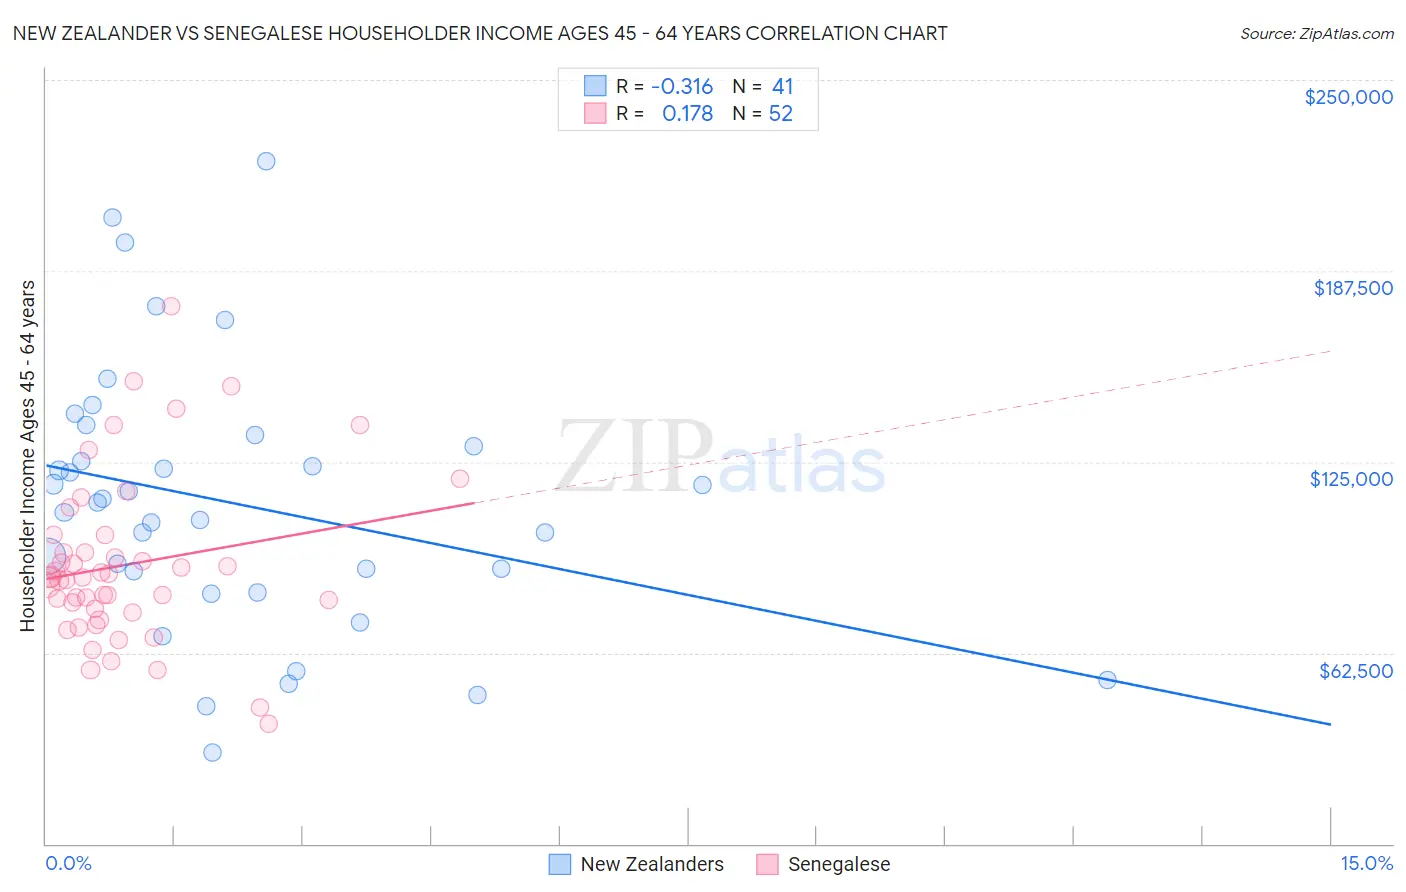 New Zealander vs Senegalese Householder Income Ages 45 - 64 years